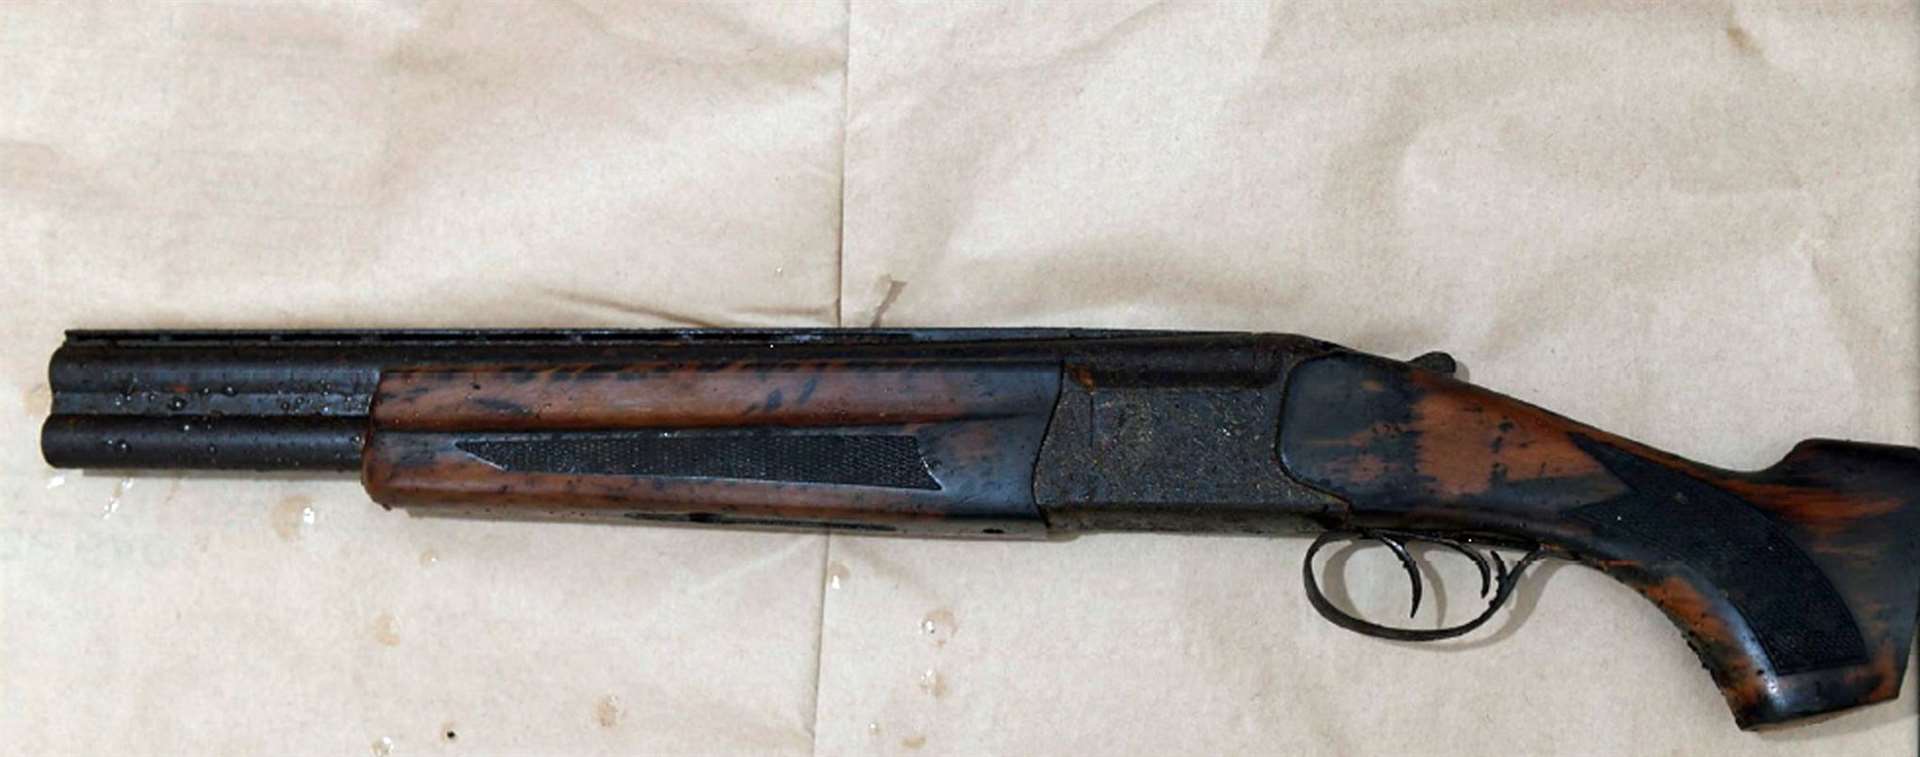 One of two suspected firearms recovered by police (PSNI/PA)